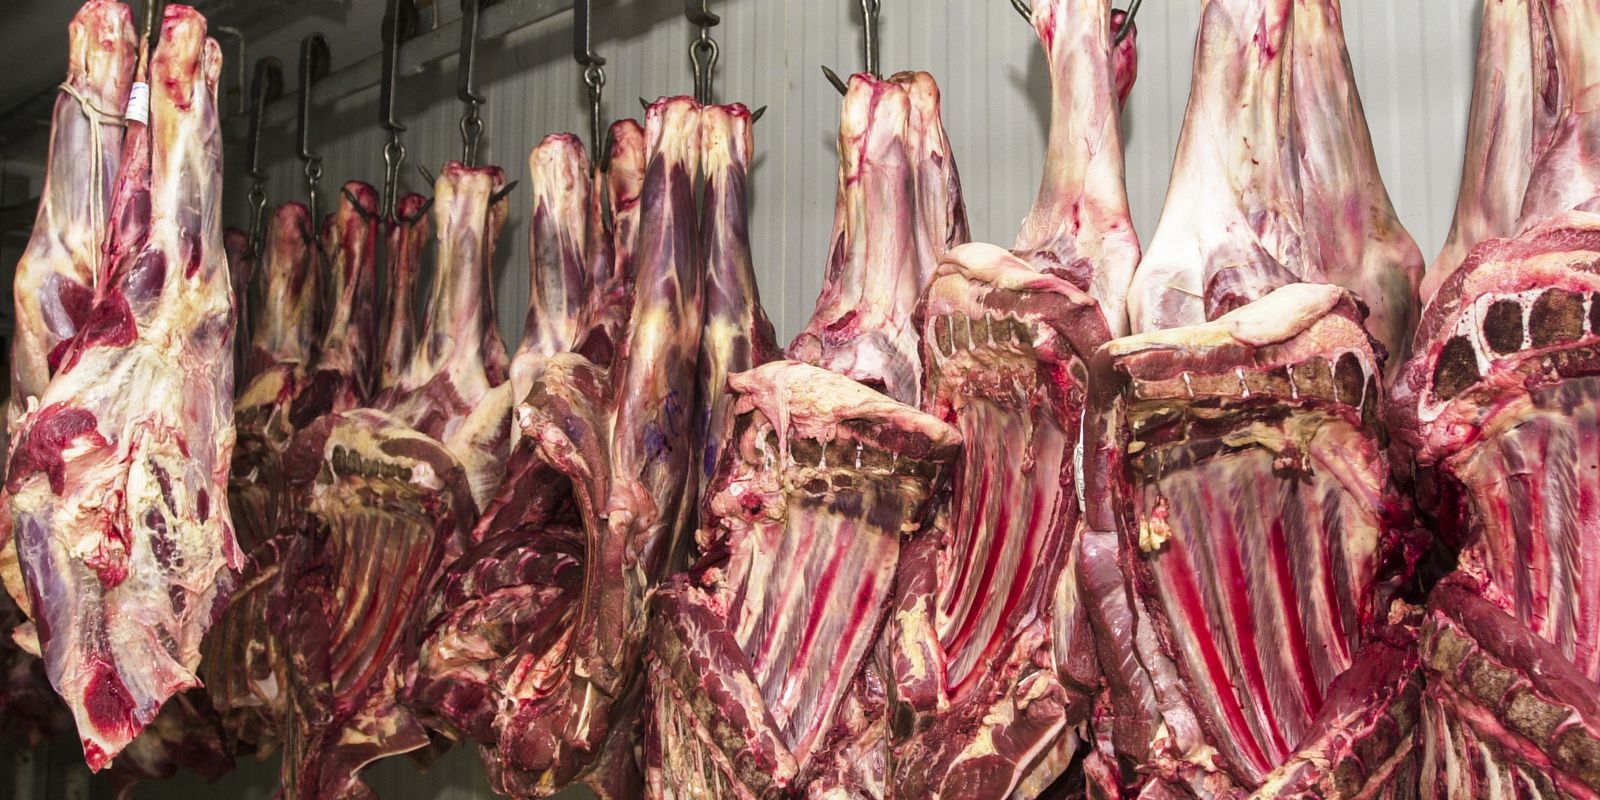 Government wants to expand municipalities that inspect animal products